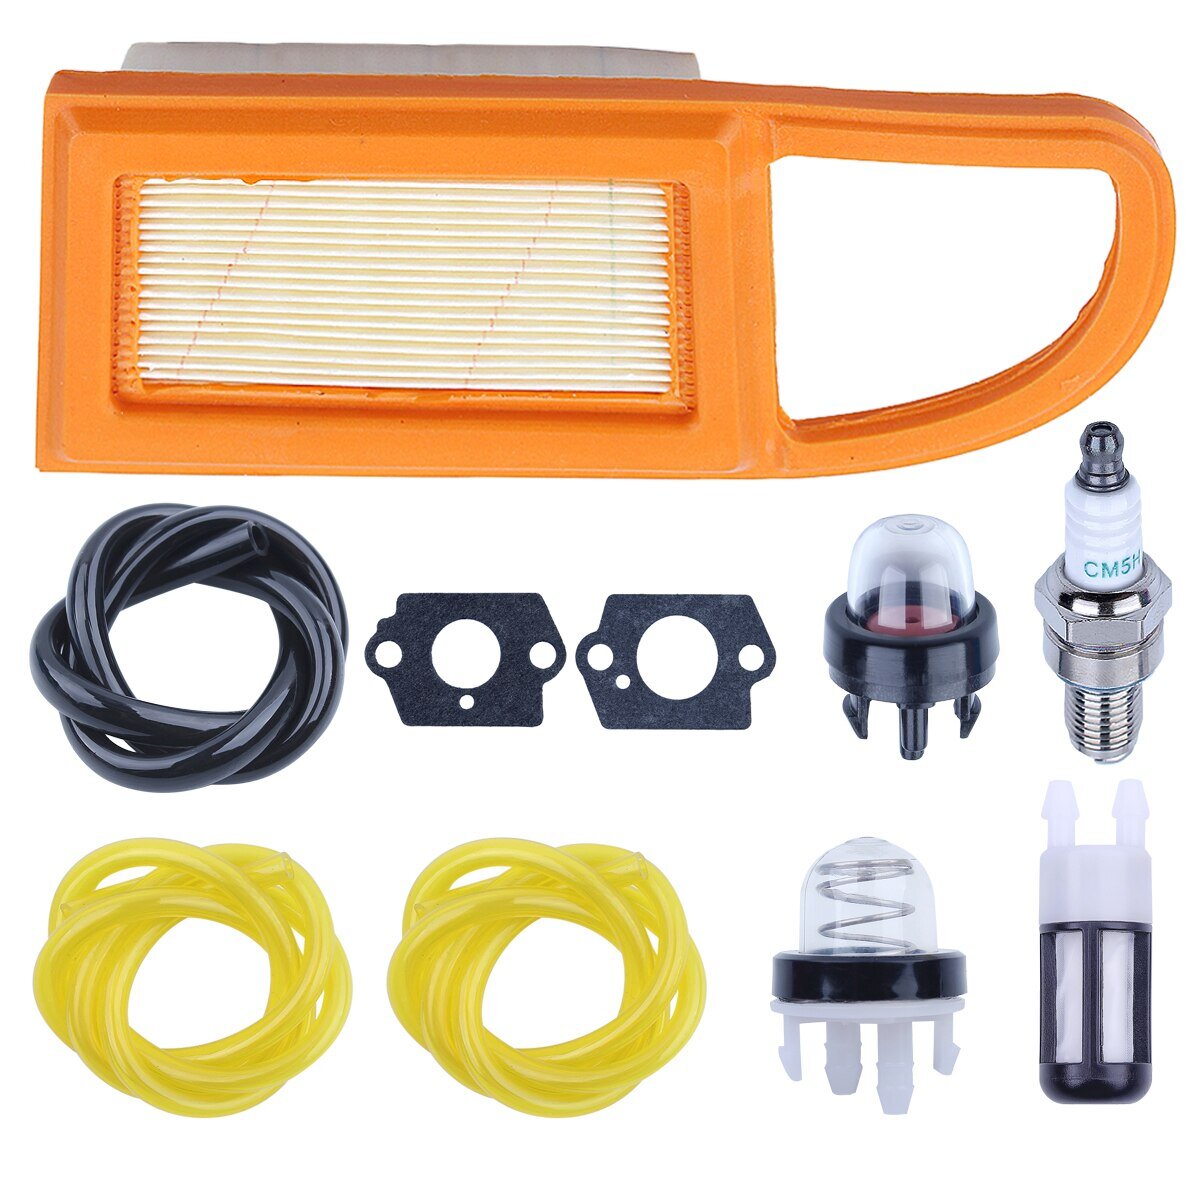 Air Fuel Filter Kit For Stihl BR600 BR550 BR500 Blower Replace 4282 141 0300, 0000 350 3514 w Carb Gasket Primer Bulb